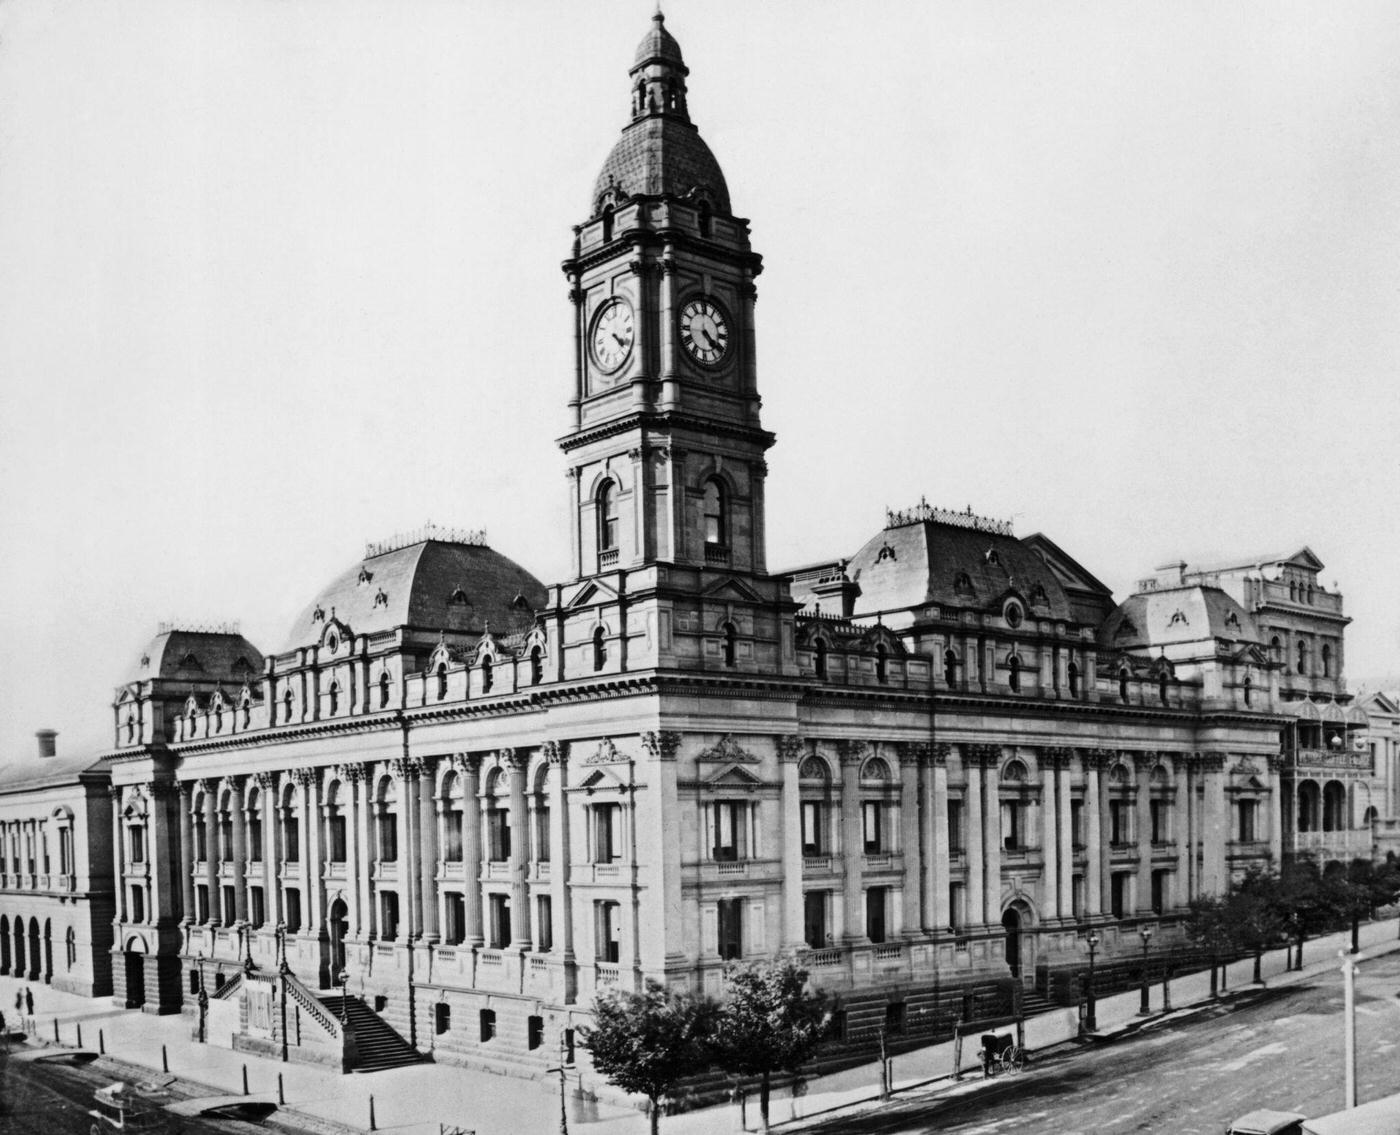 Melbourne Town Hall on the corner of Swanston and Collins Streets, Melbourne, 1880